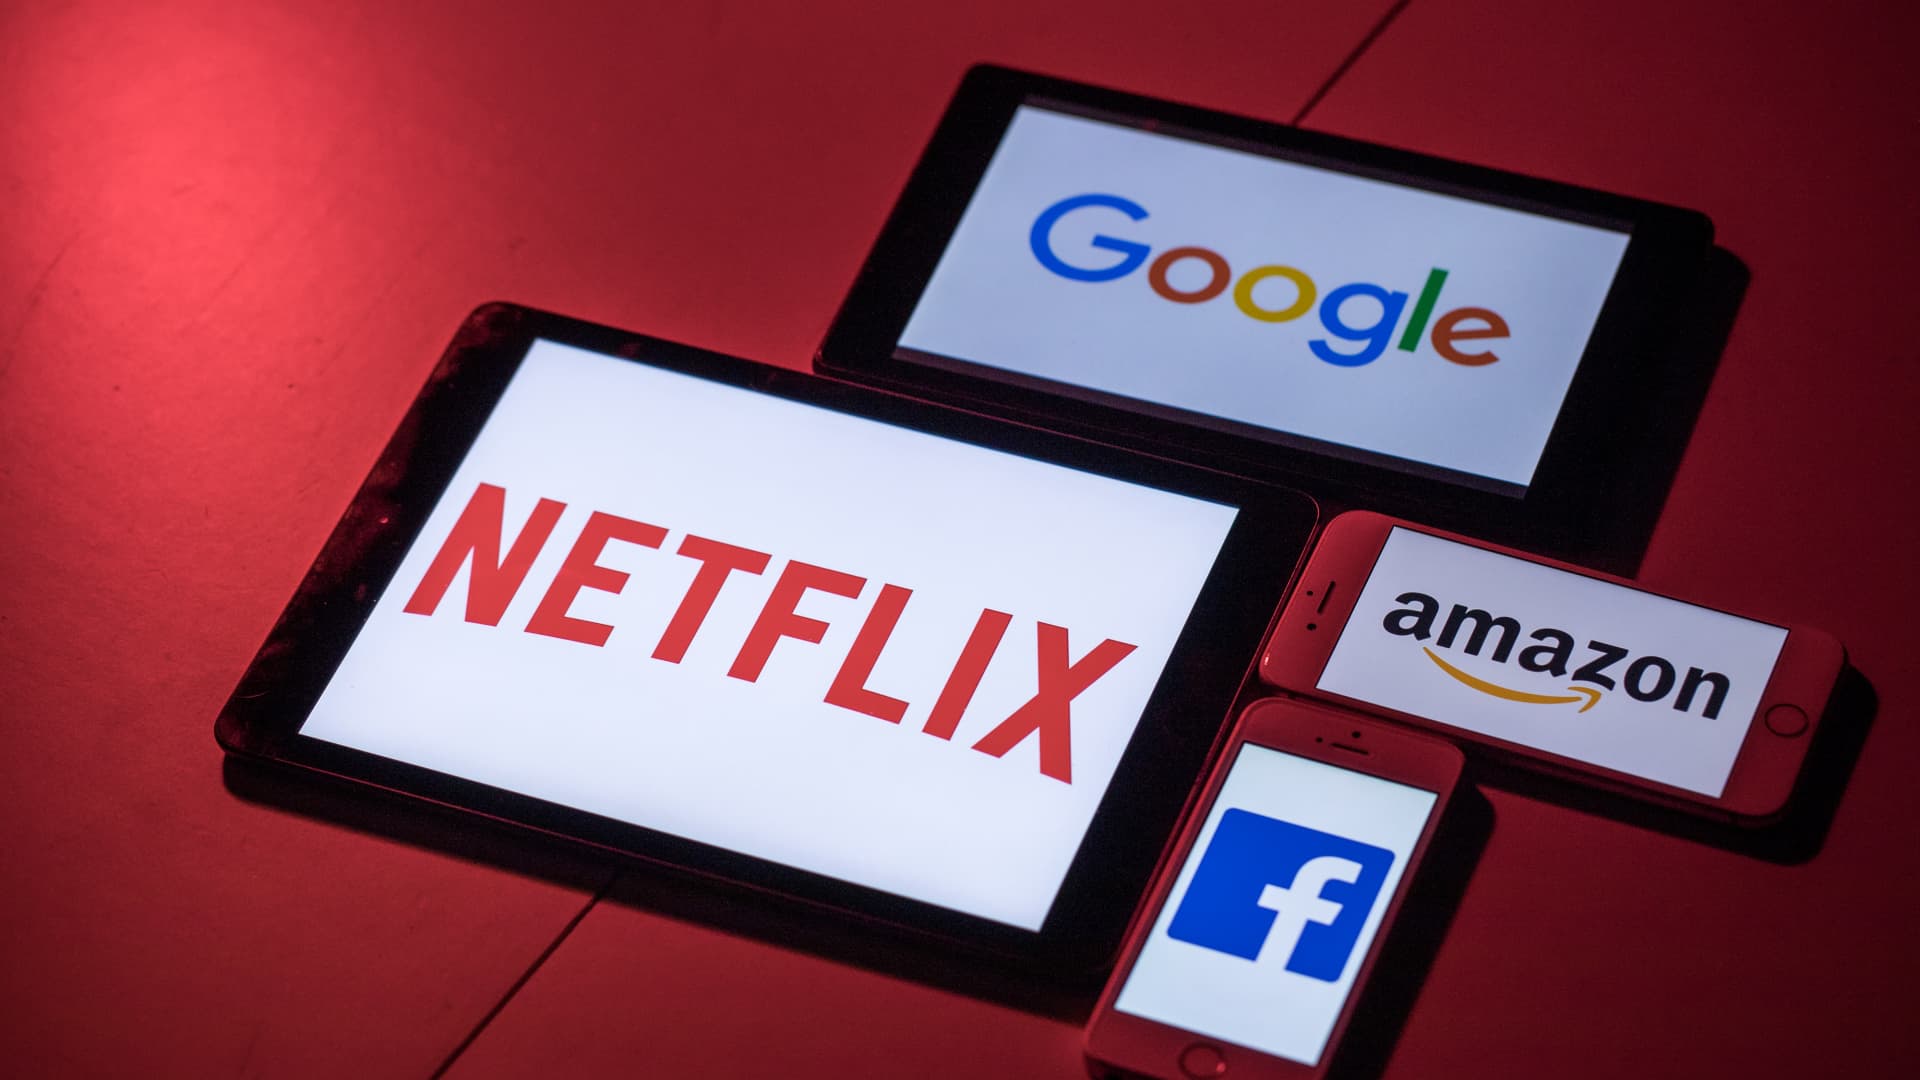 The logos for Facebook, Amazon, Netflix and Google, on smartphone and tablet devices